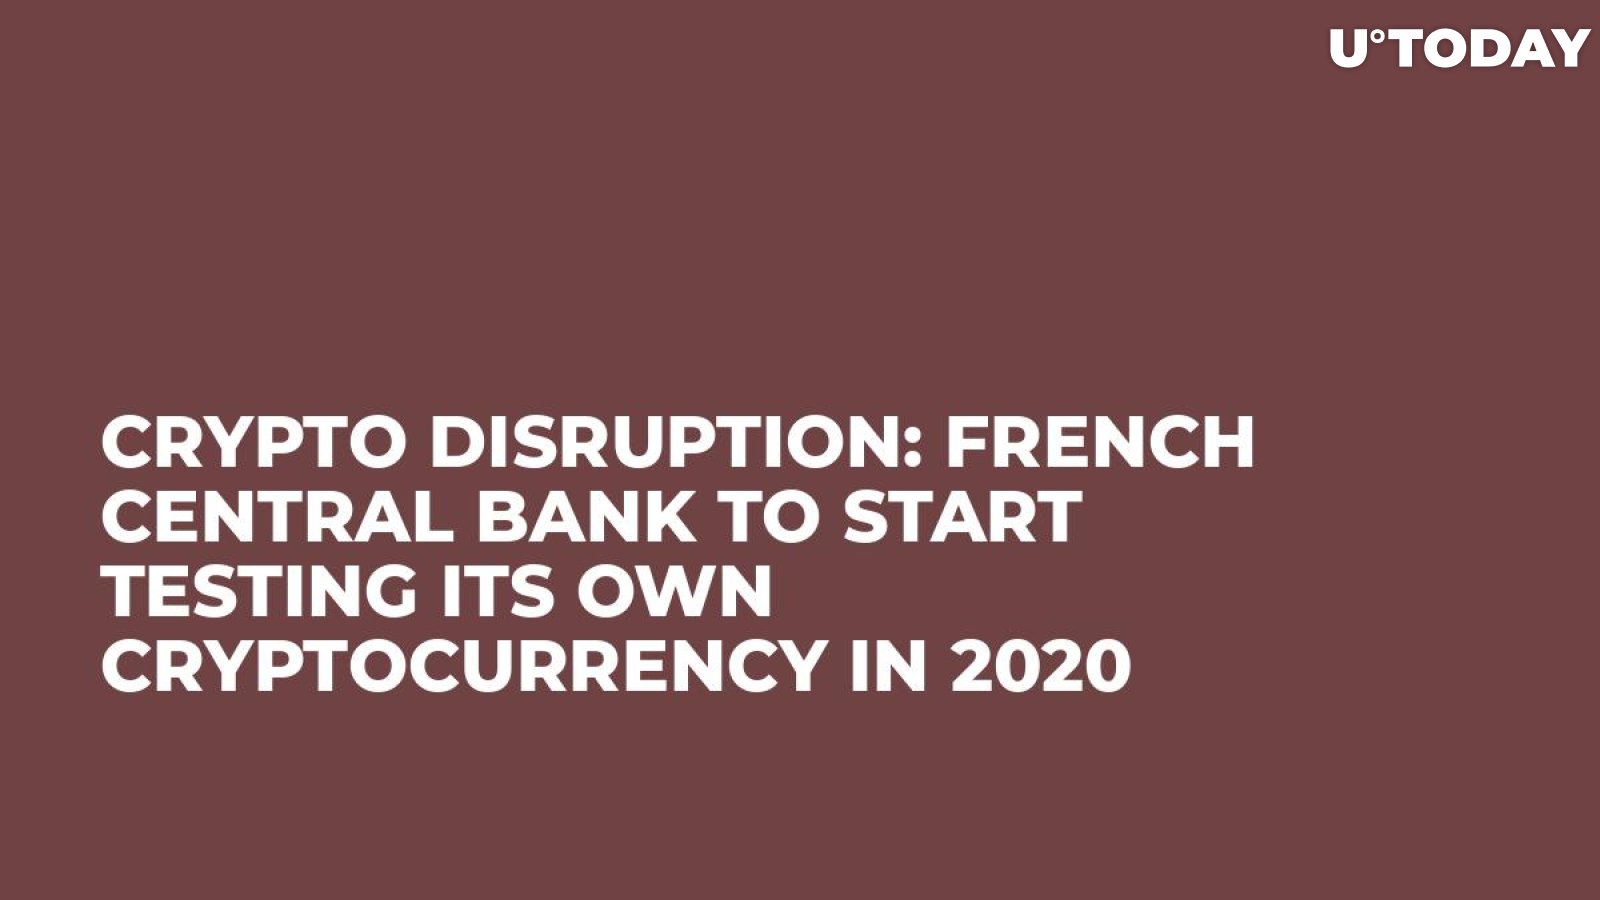 Crypto Disruption: French Central Bank to Start Testing Its Own Cryptocurrency in 2020